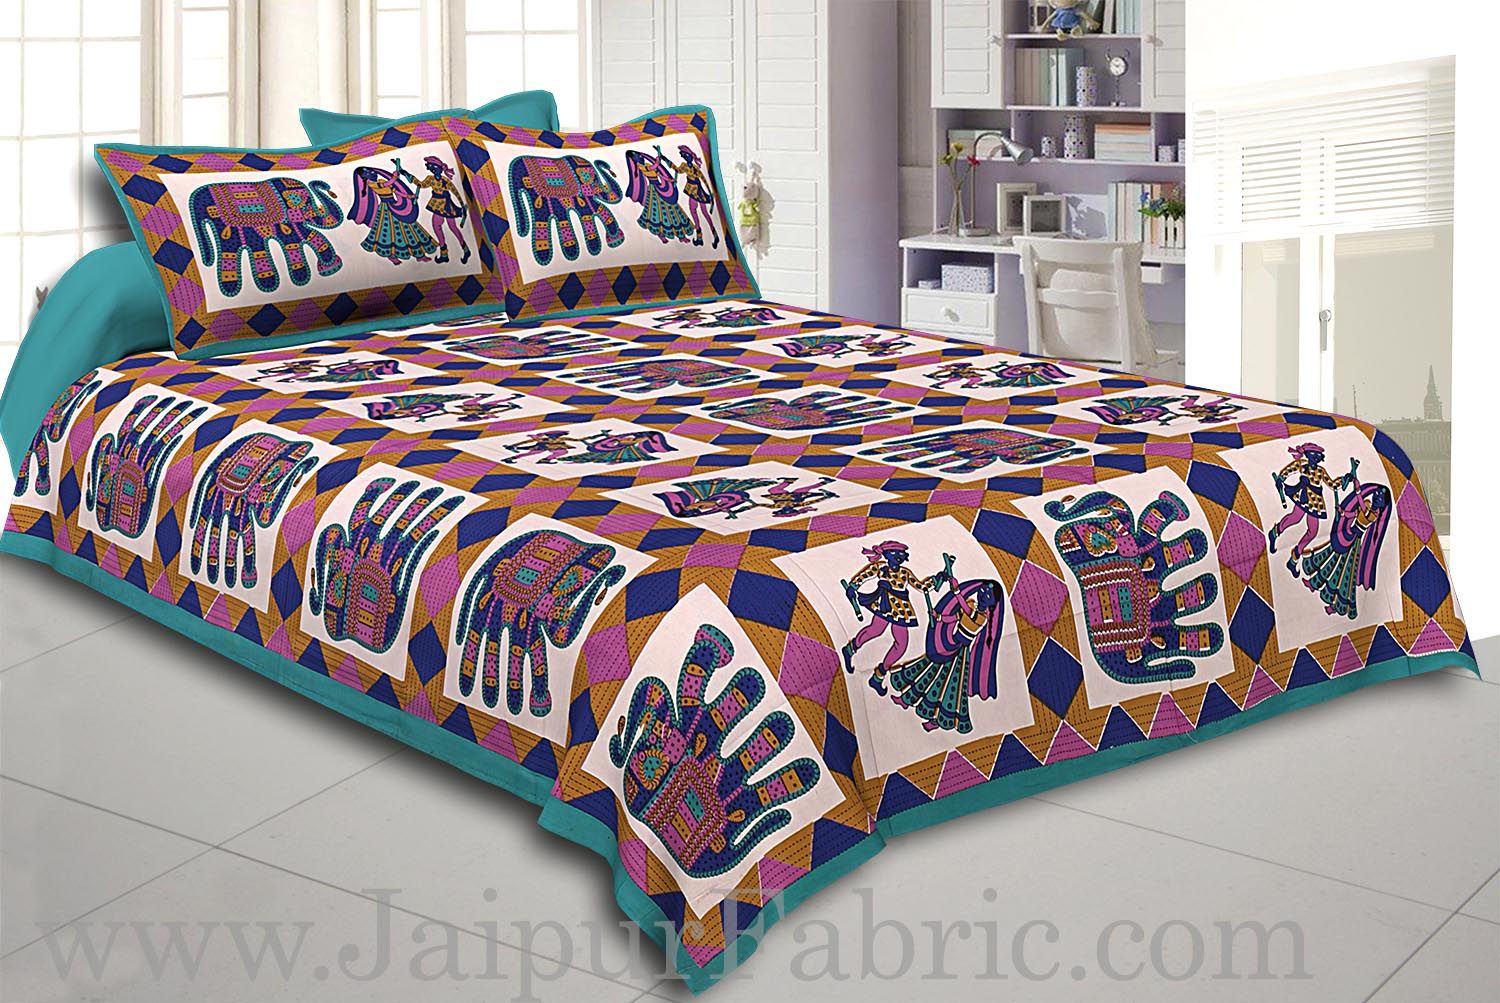 Firozi Border Elephant and Rhombus Pattern Screen Print Cotton Double Bed Sheet